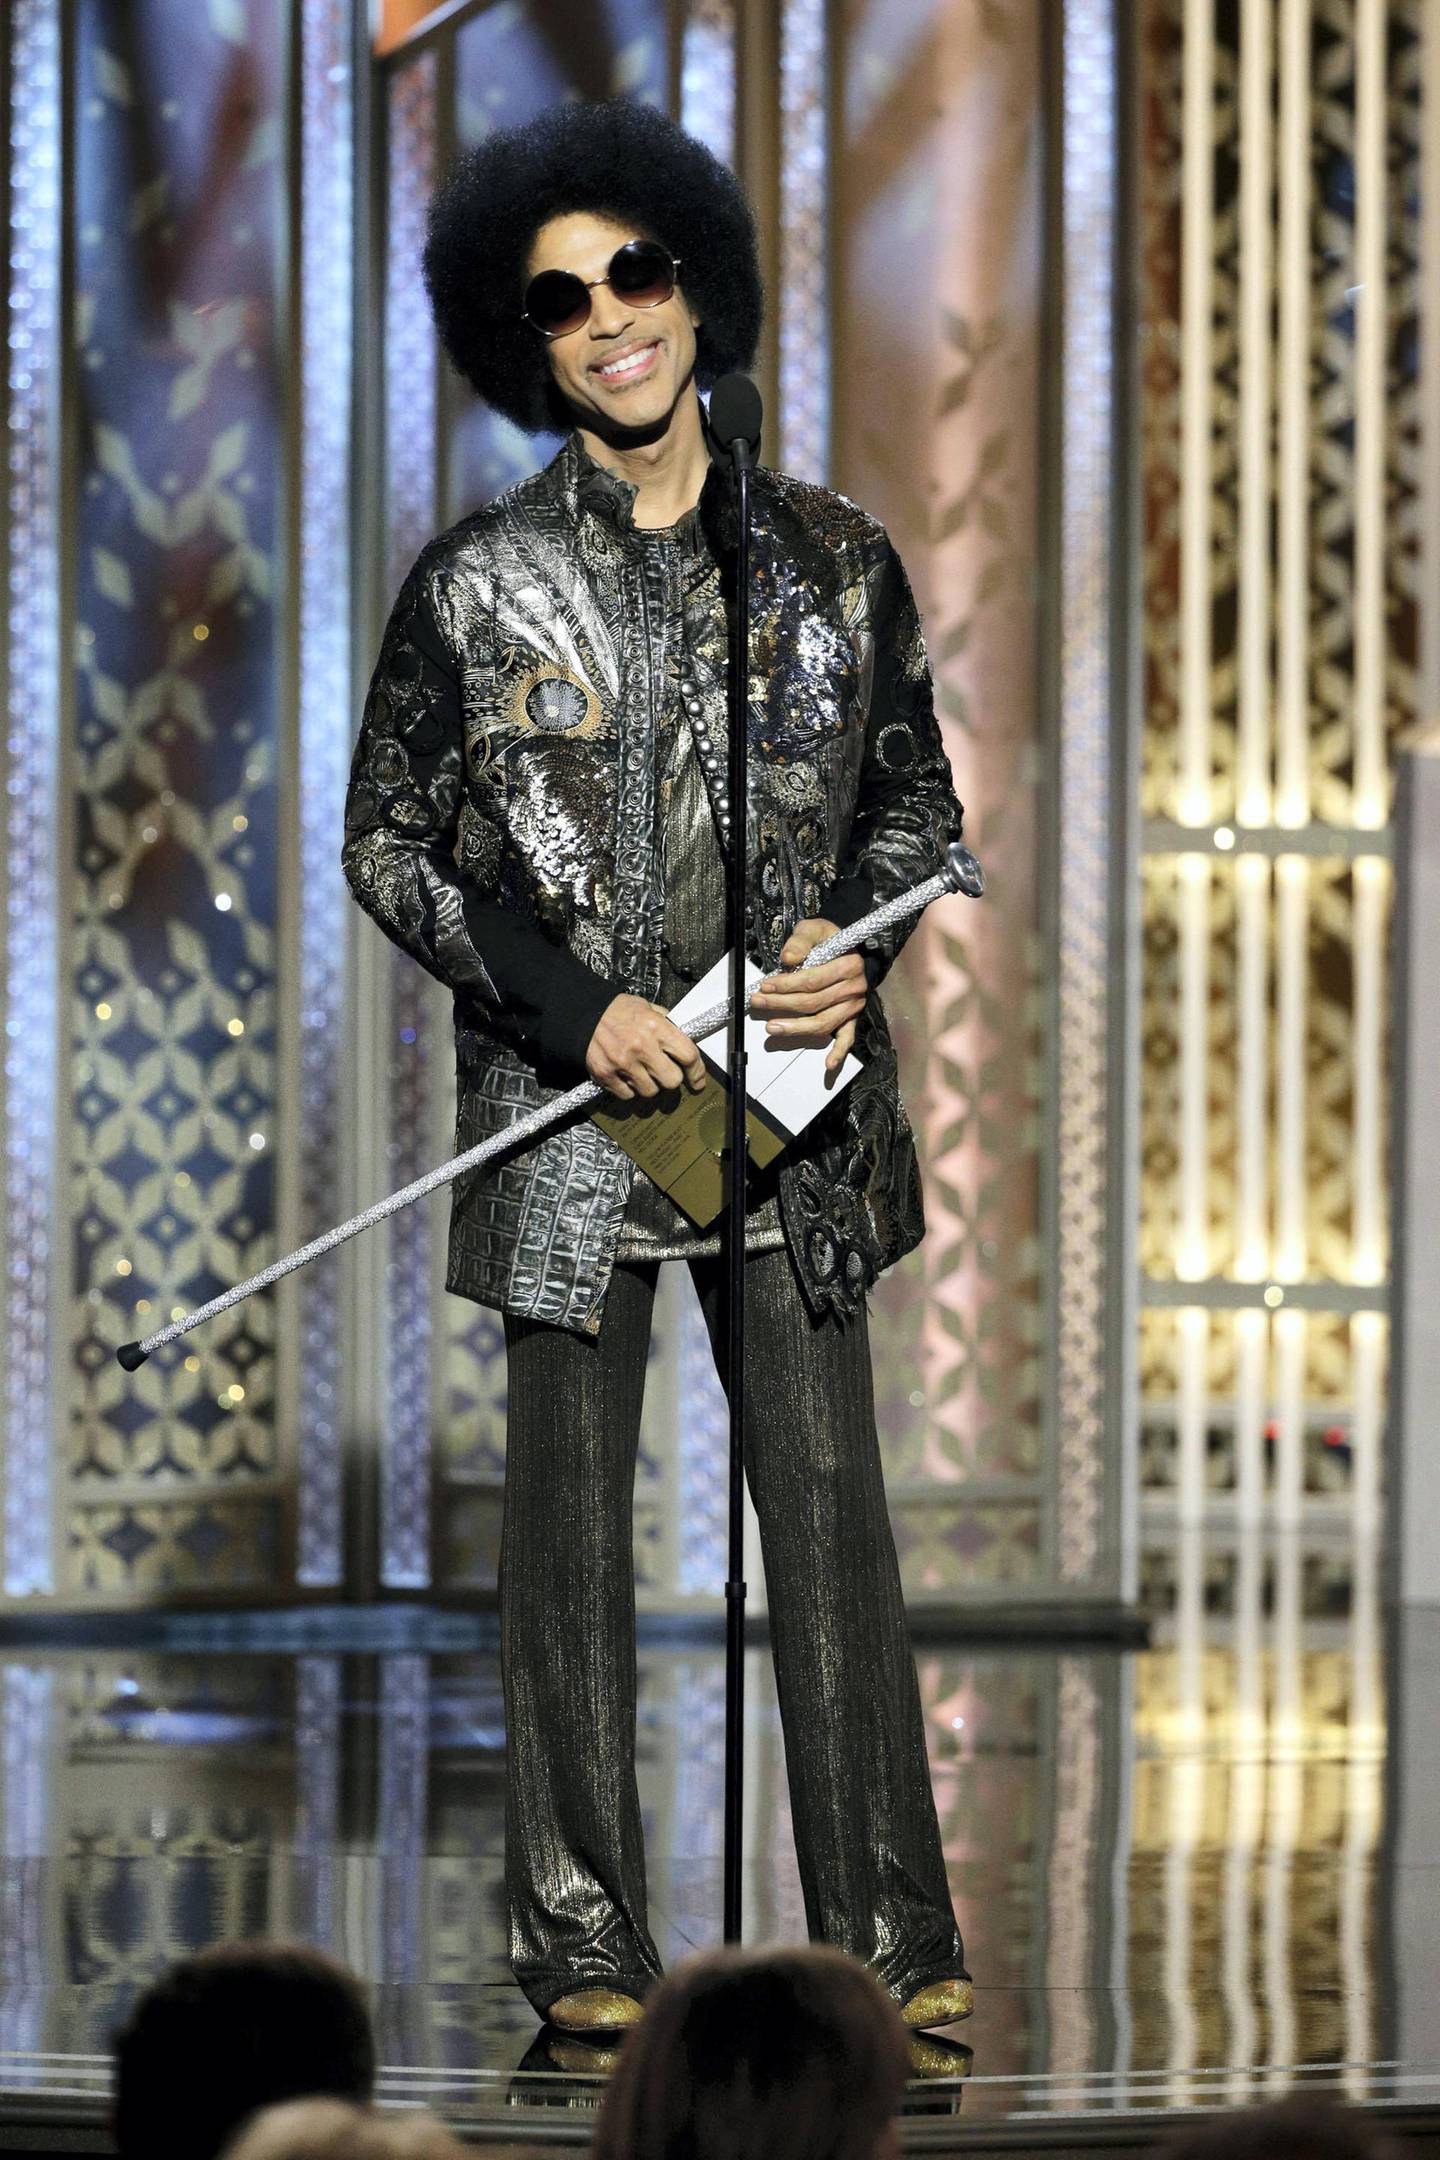 BEVERLY HILLS, CA - JANUARY 11:  In this handout photo provided by NBCUniversal, Presenter  Prince speaks onstage during the 72nd Annual Golden Globe Awards at The Beverly Hilton Hotel on January 11, 2015 in Beverly Hills, California.  (Photo by Paul Drinkwater/NBCUniversal via Getty Images)